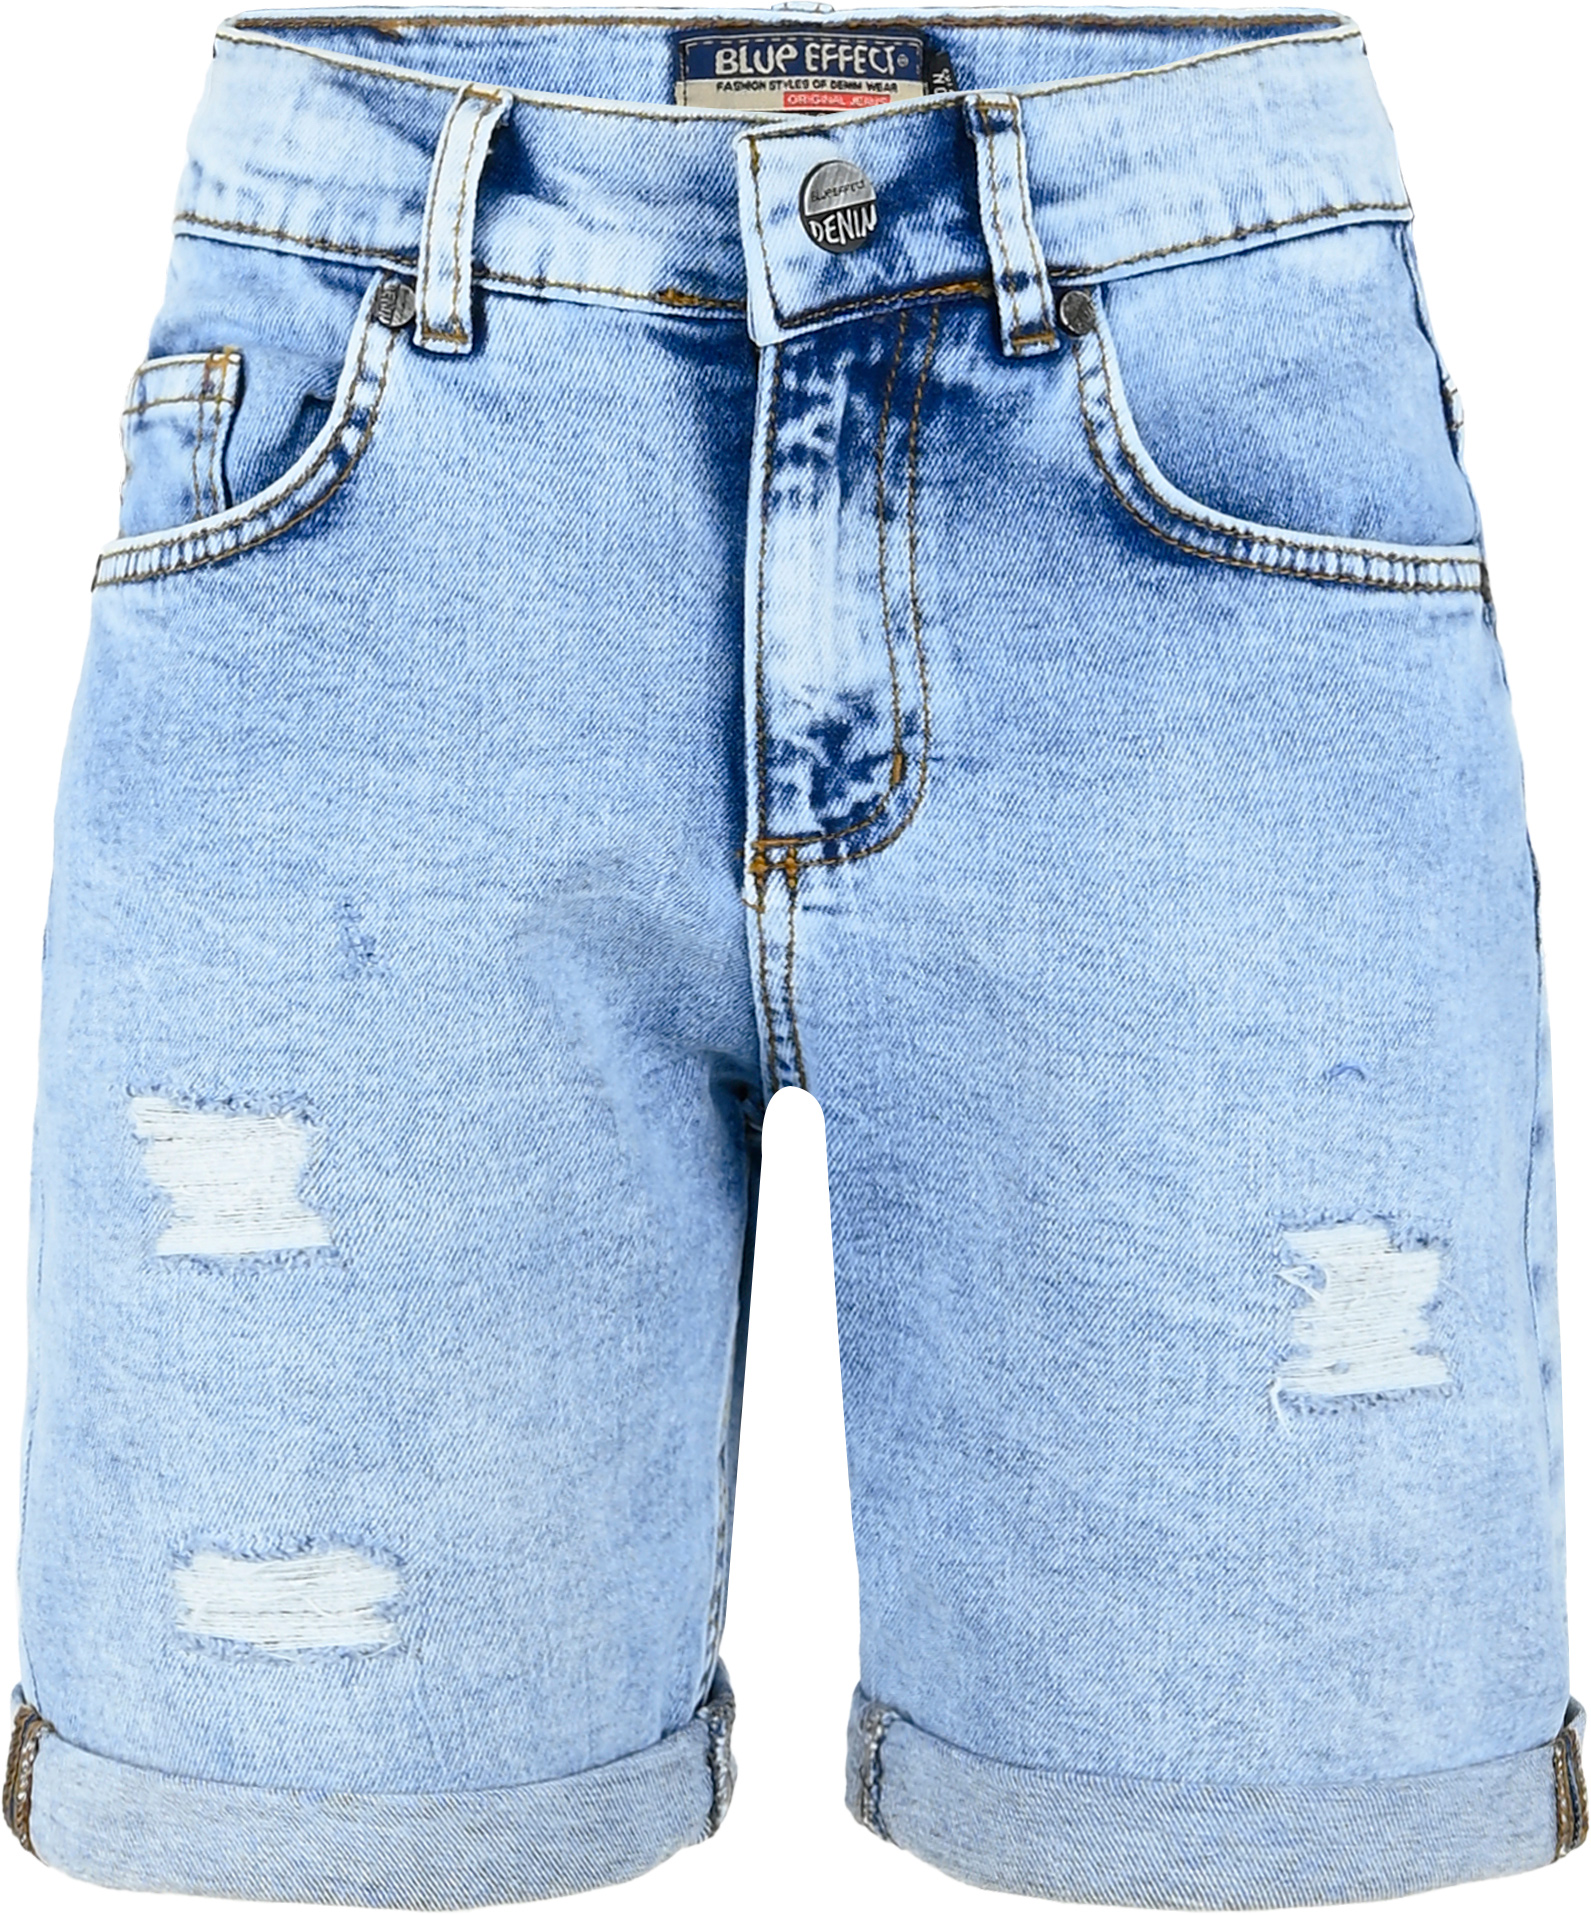 4839-Boys Loose Fit Jean Short available in Normal